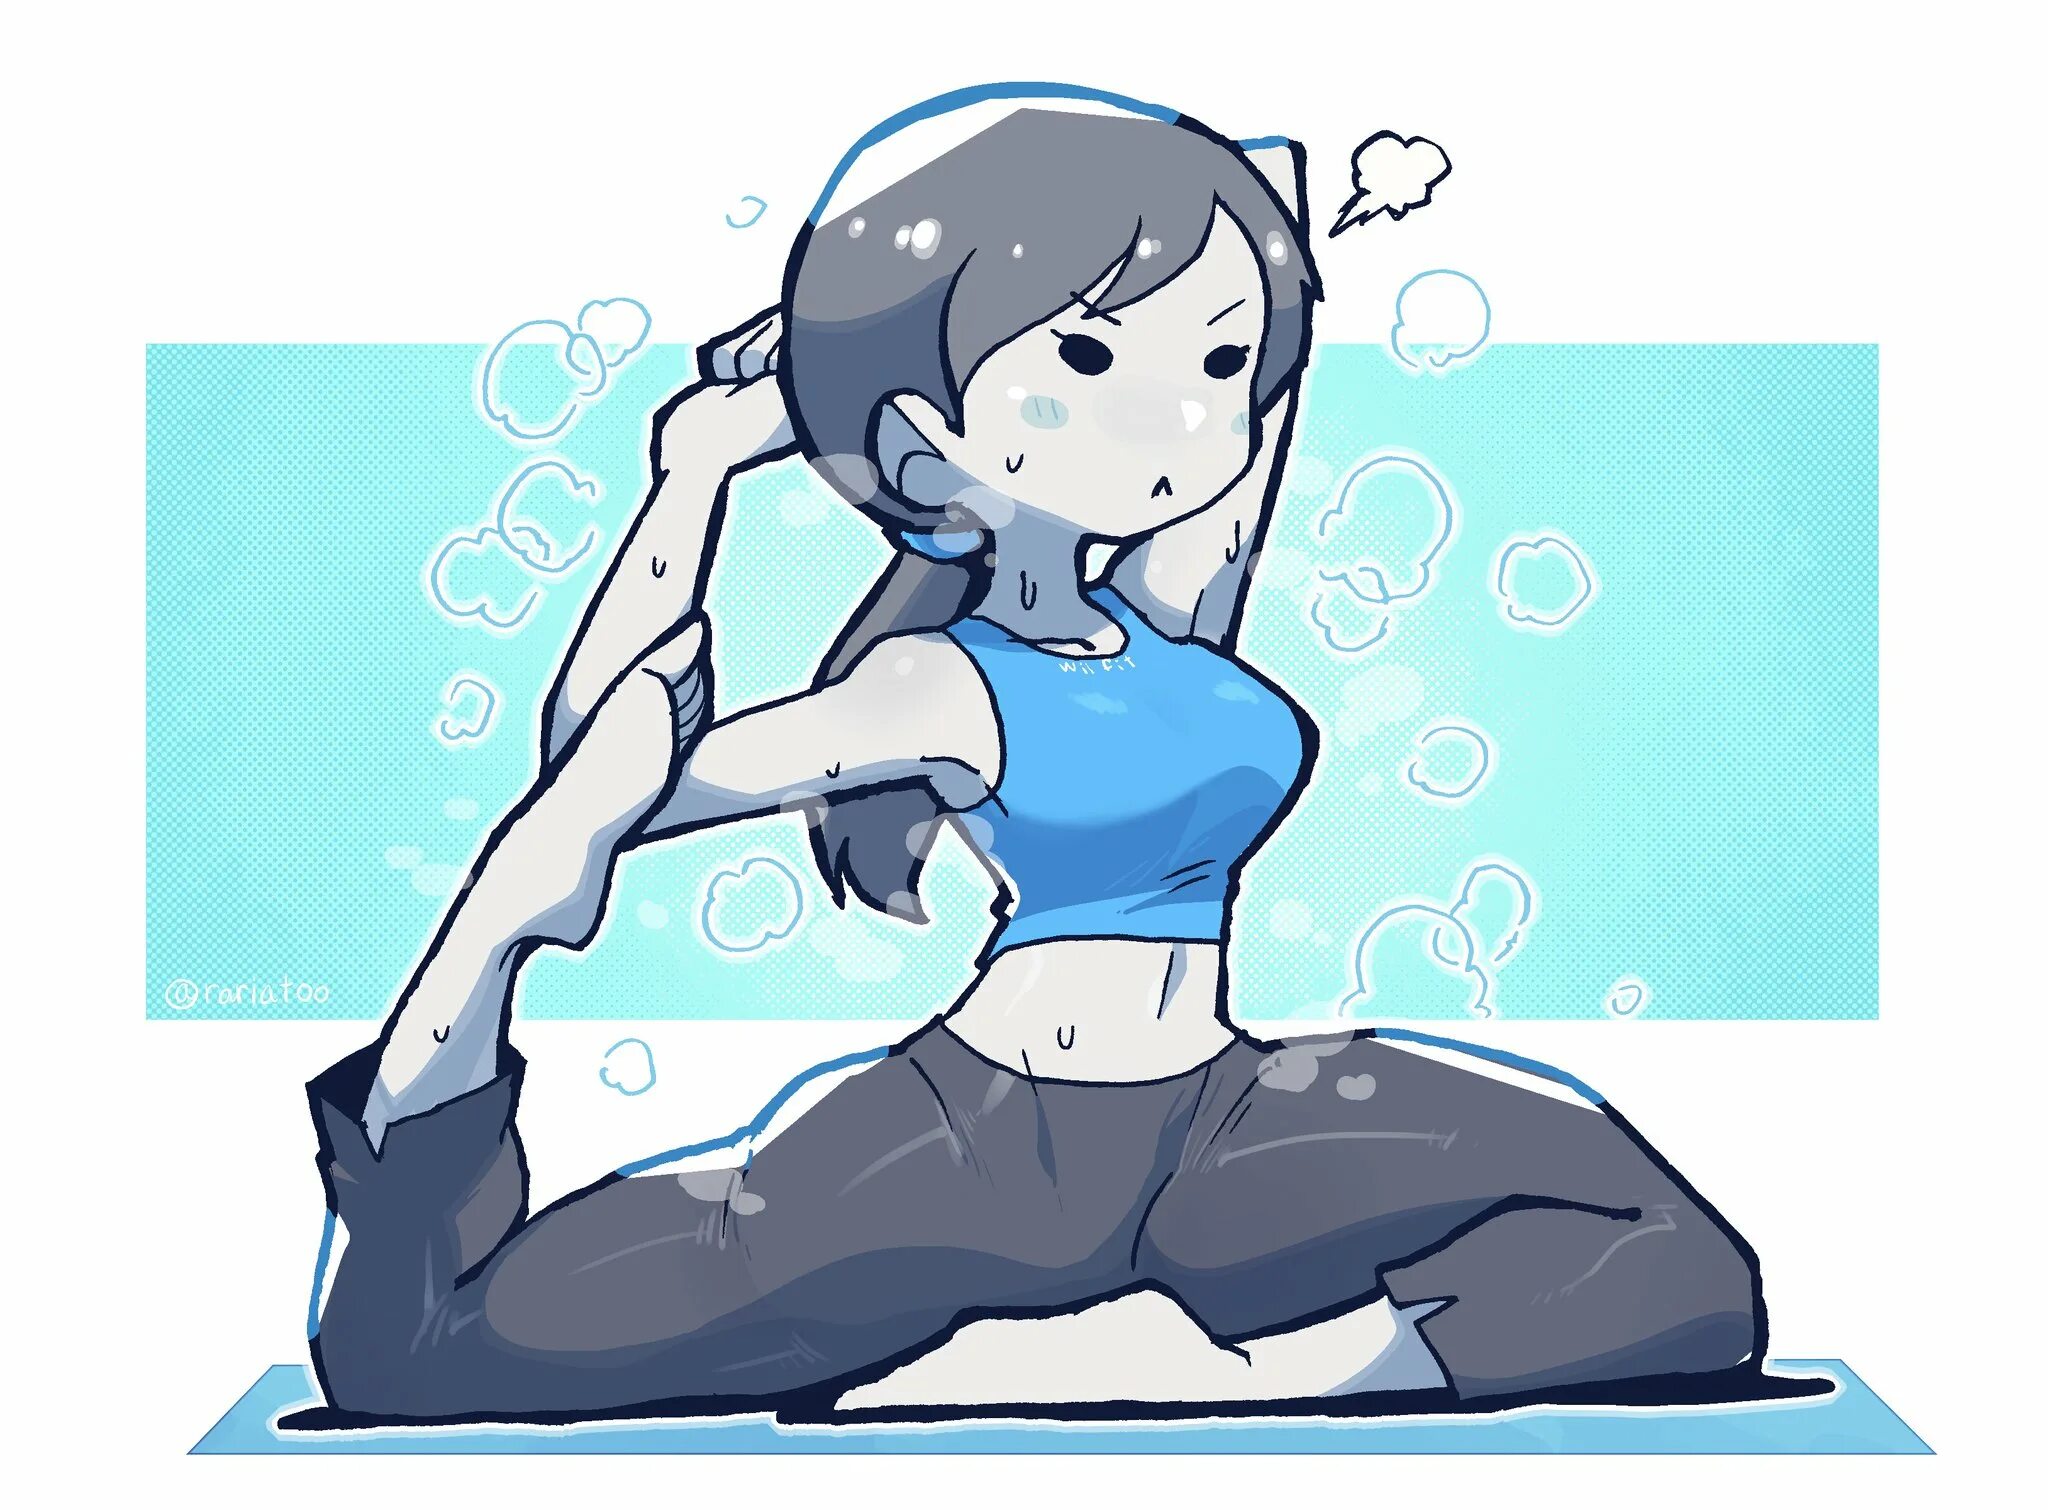 Wii fit. Wii Fit Trainer 34 18. Wii Fit Trainer 18. Wii Fit Trainer 34 giant. Тренер Wii Fit Art.